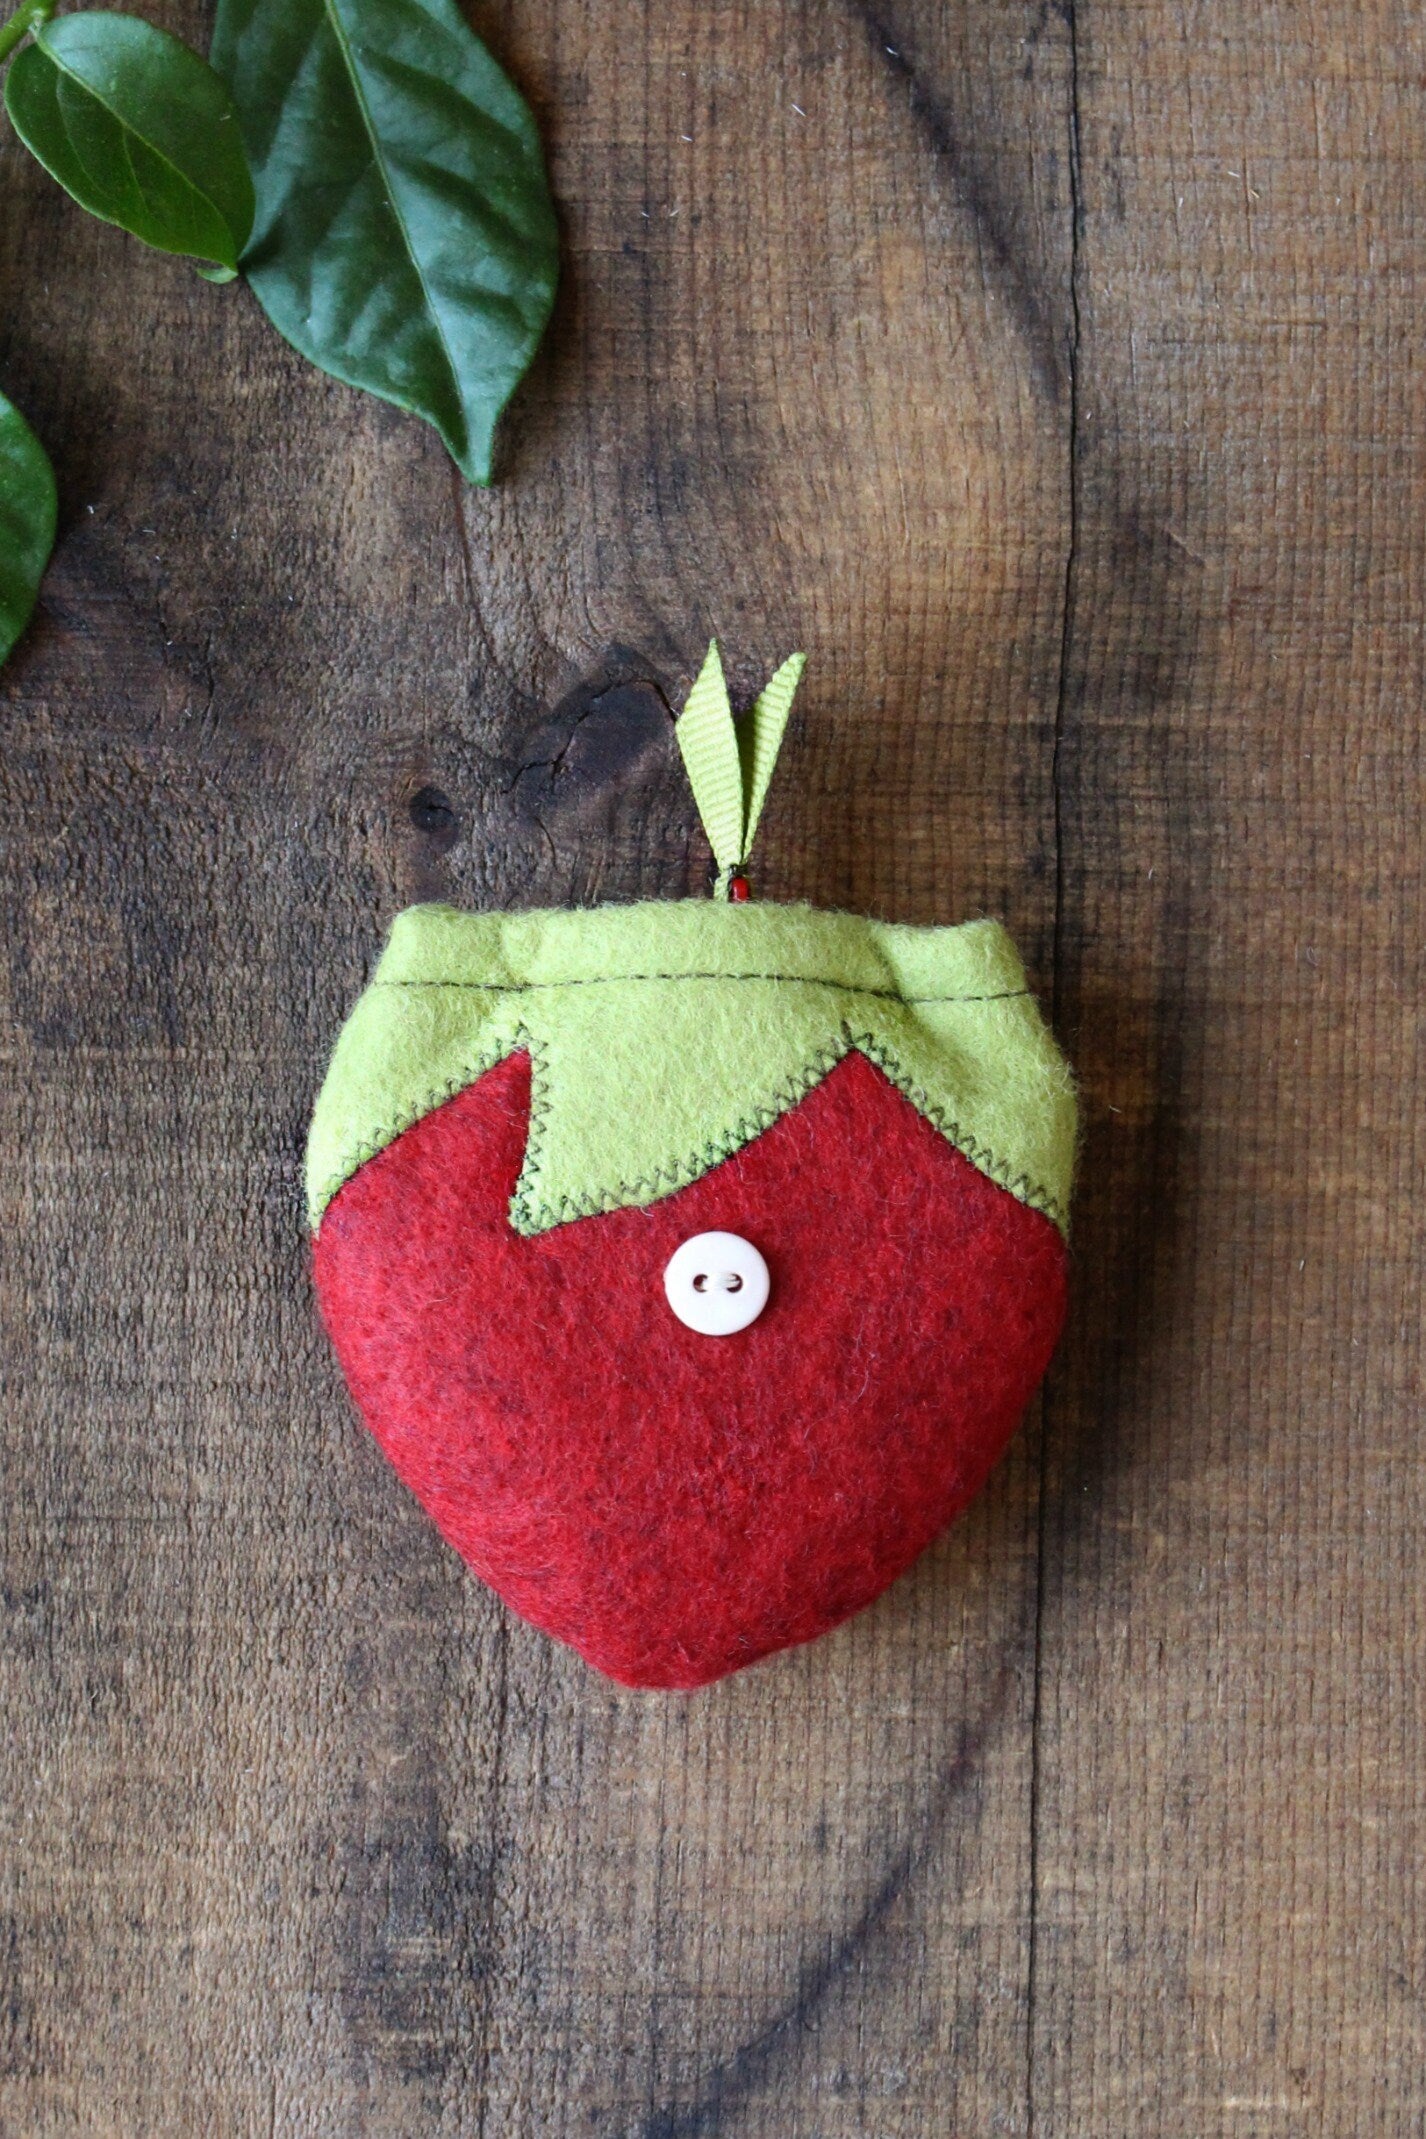 Felt Sewing Pattern • Strawberry Felt Tape Measure PDF Sewing Pattern • DIY Gift for Sewists Easy Sewing Pattern